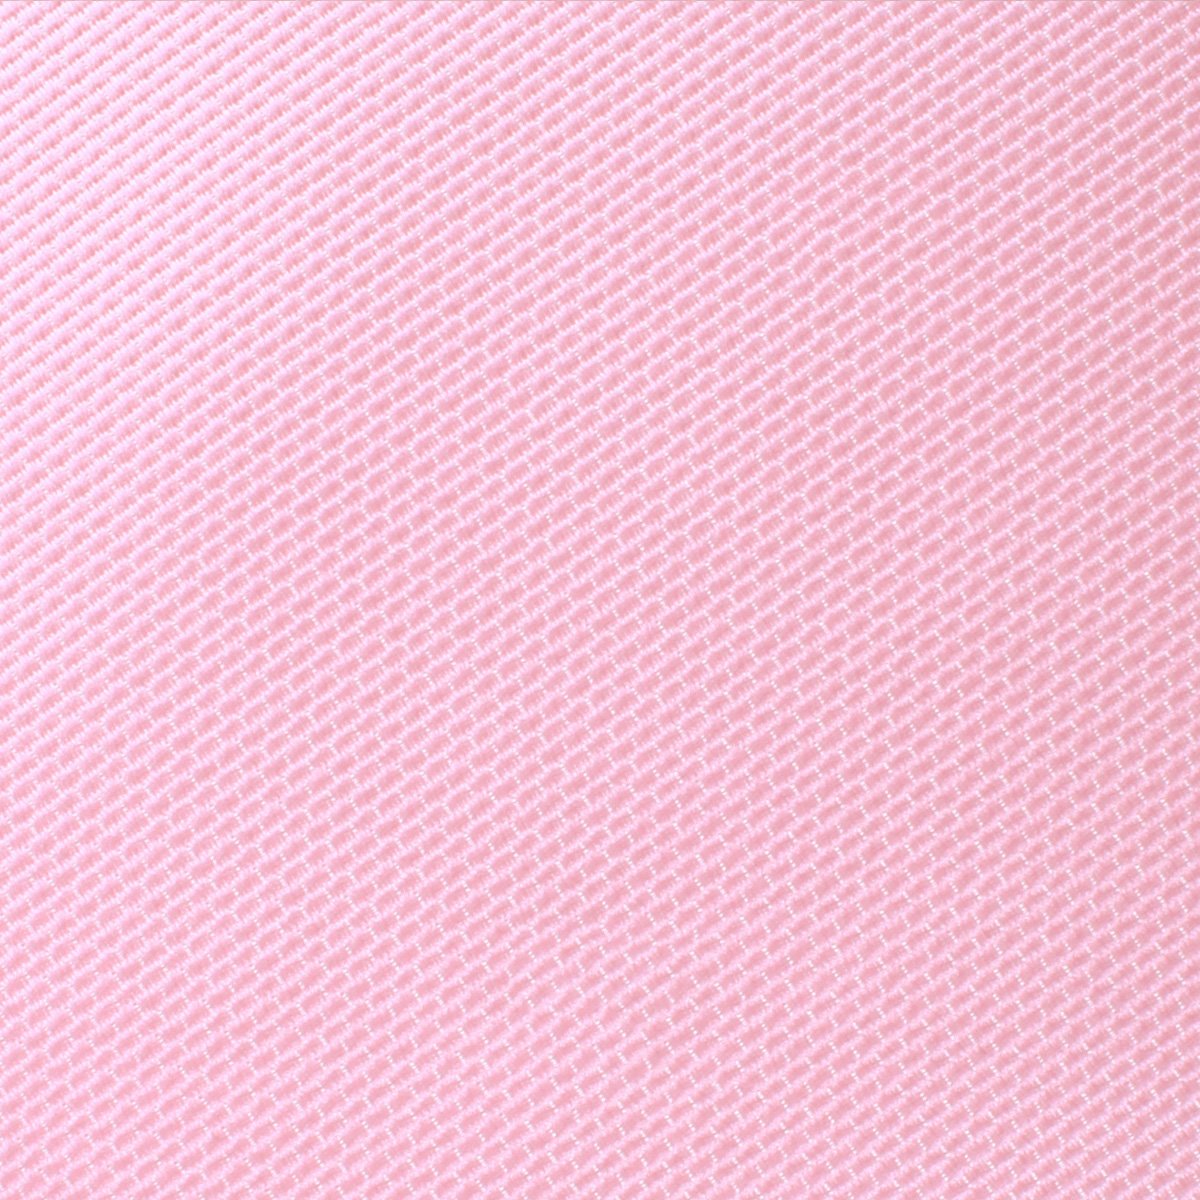 Tickled Pink Weave Skinny Tie Fabric